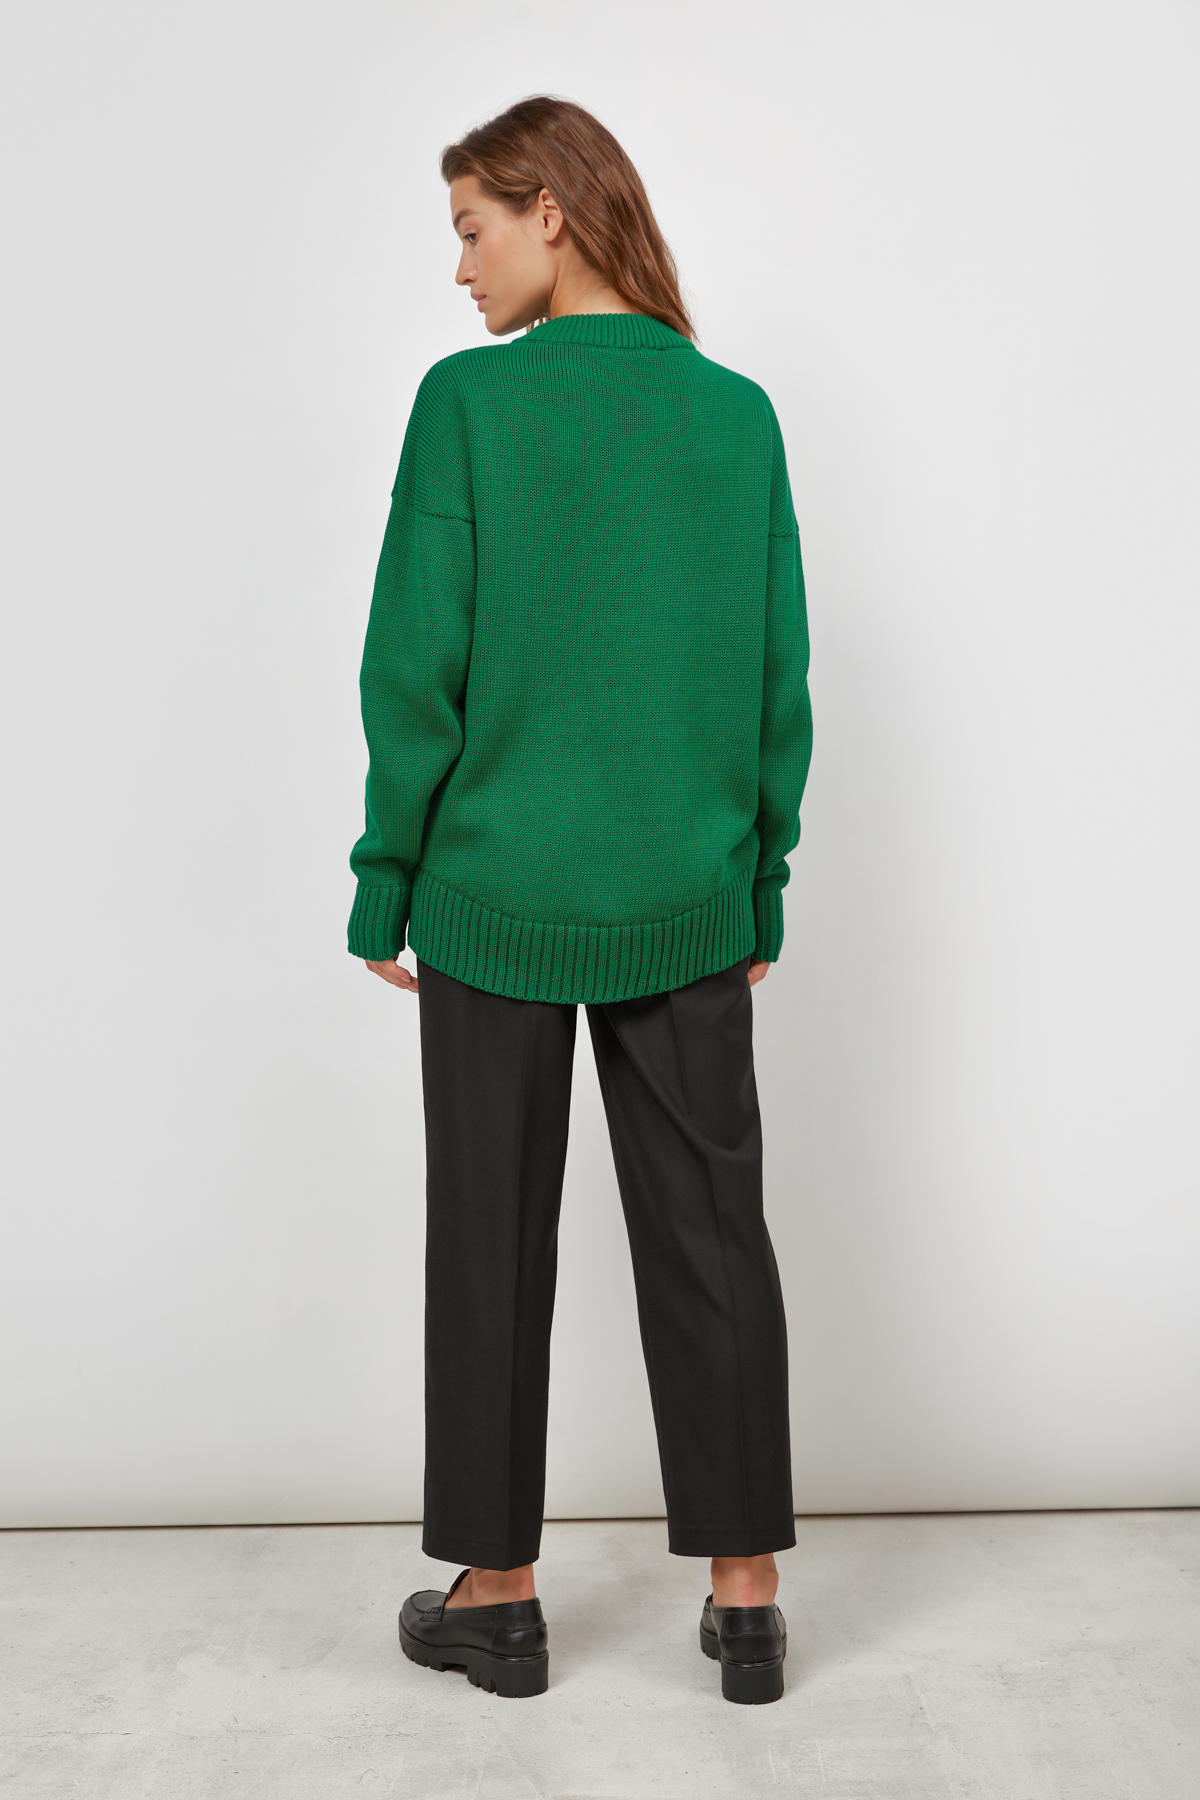 Loose fit green cotton sweater, photo 4